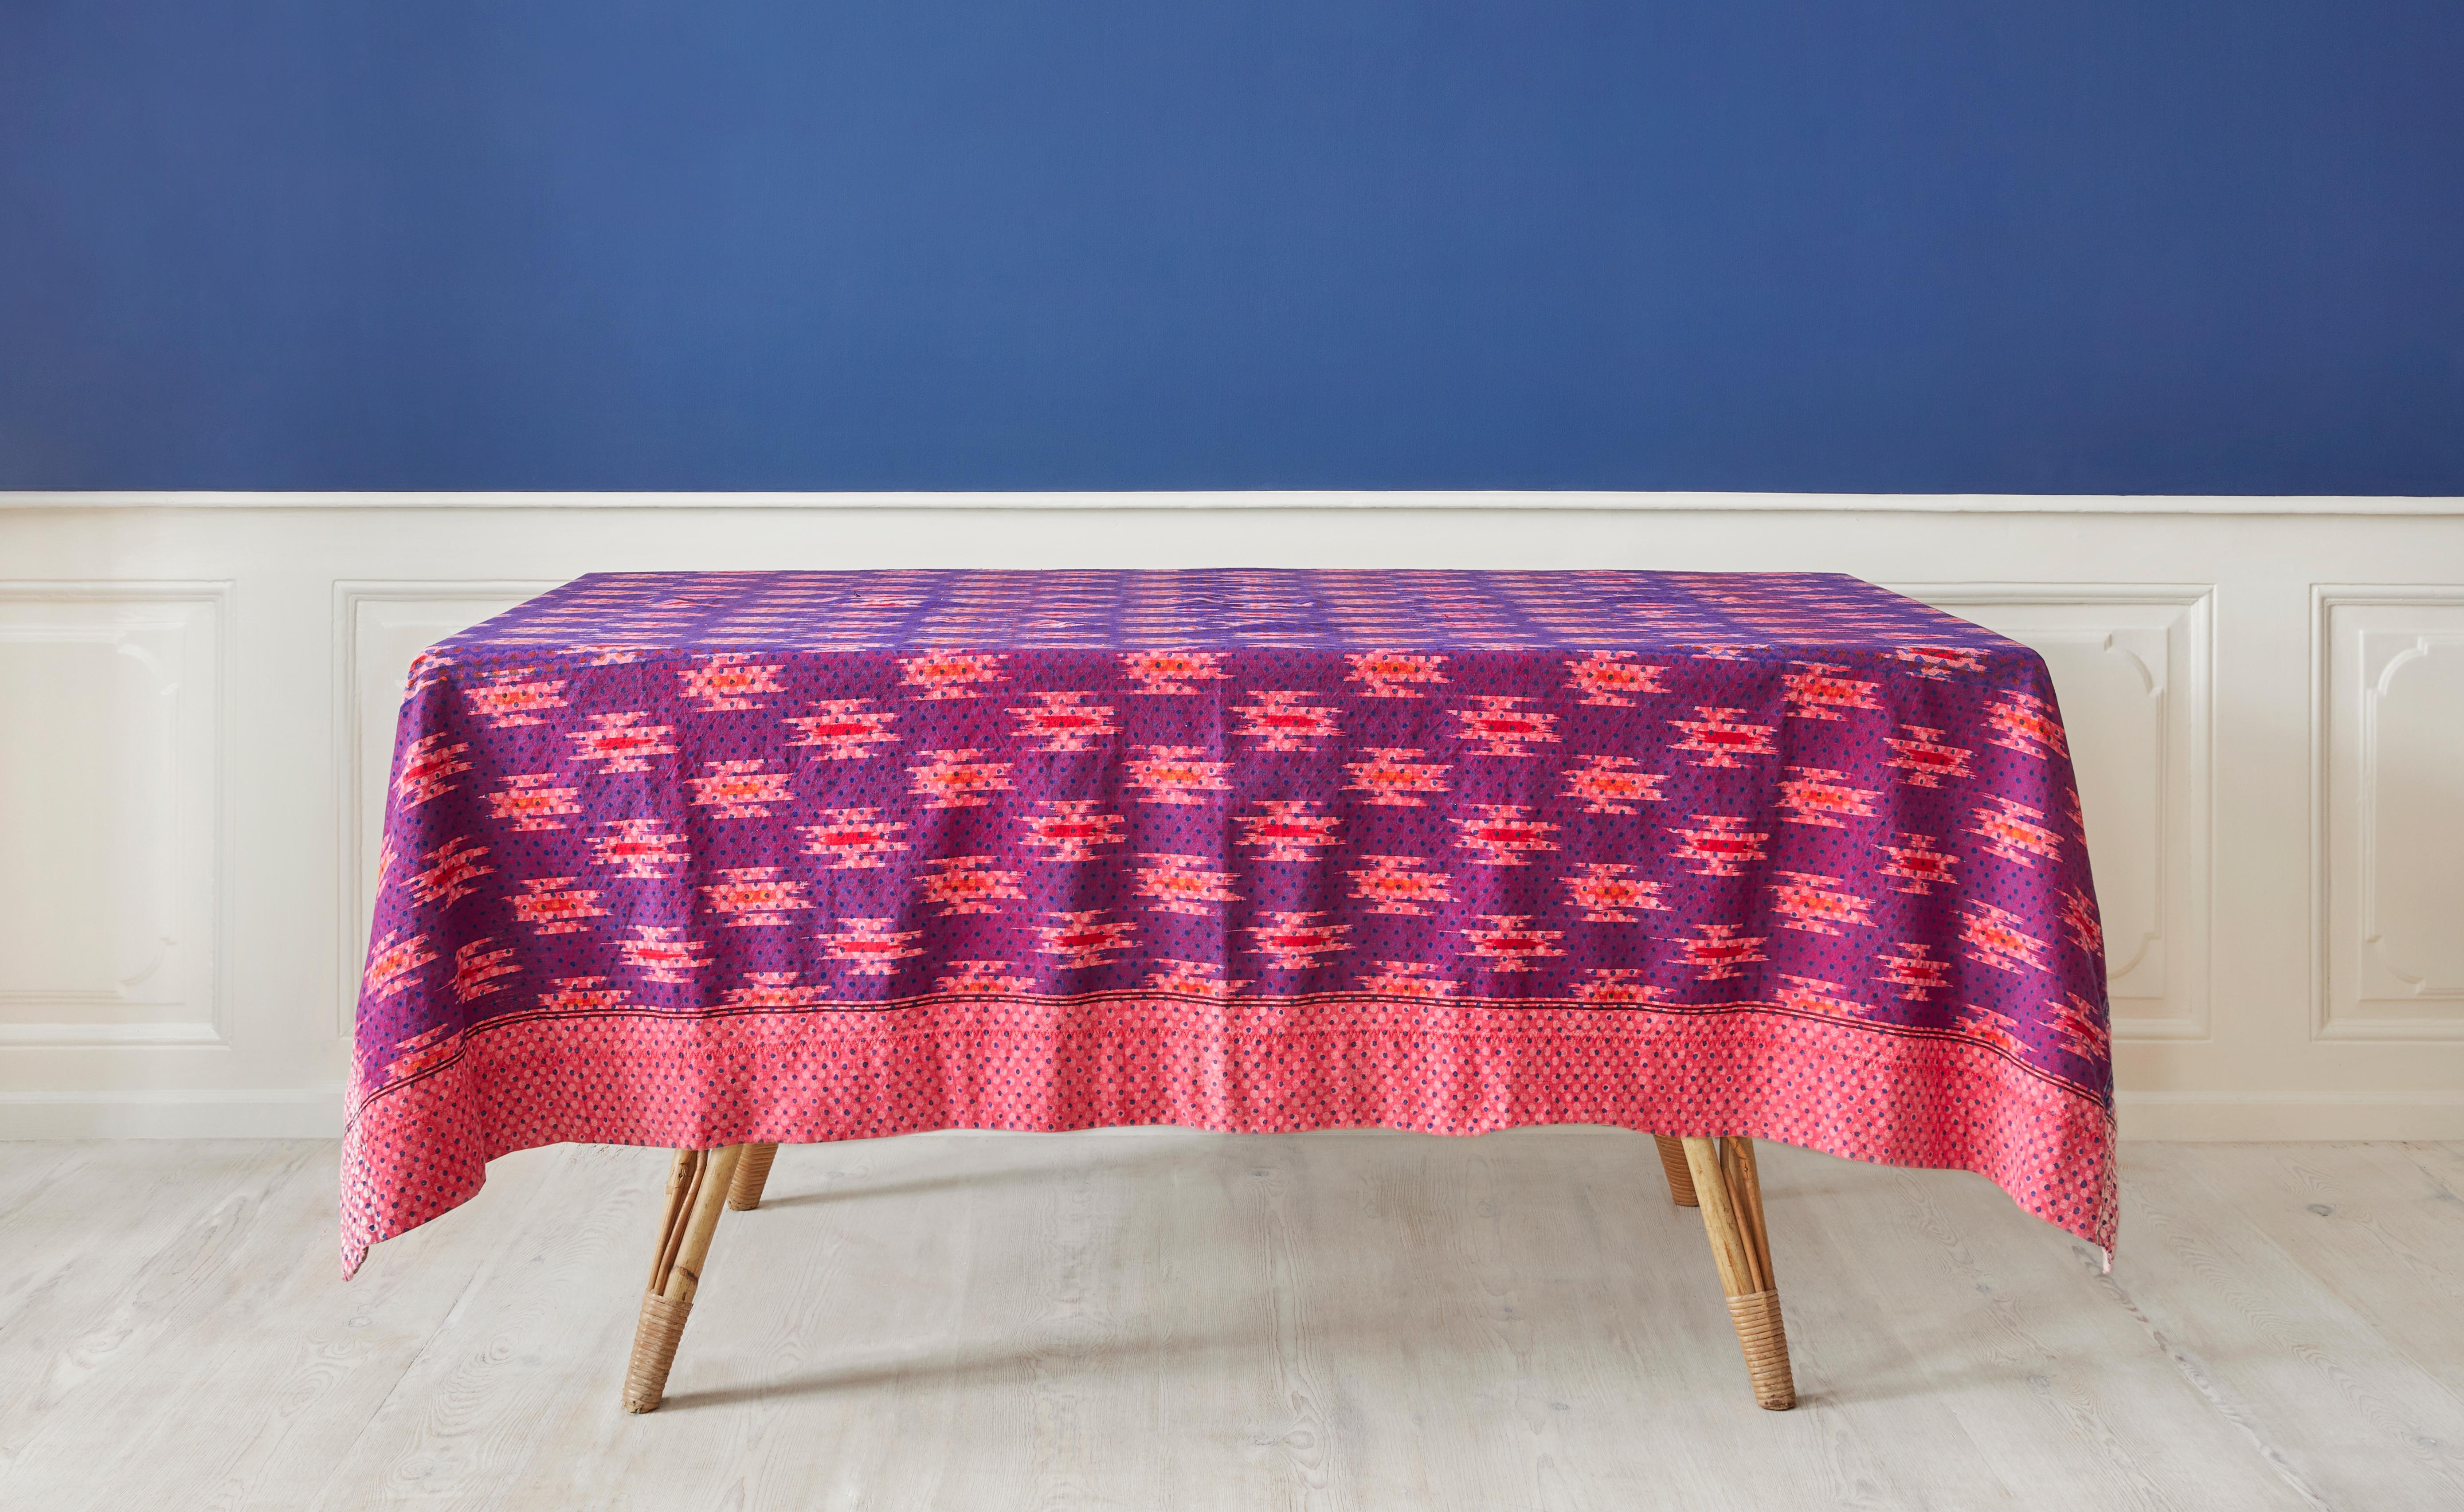 Gregory Parkinson
USA, Contemporary

One of a kind tablecloth with hand-blocked patterns on ikat textile.
 